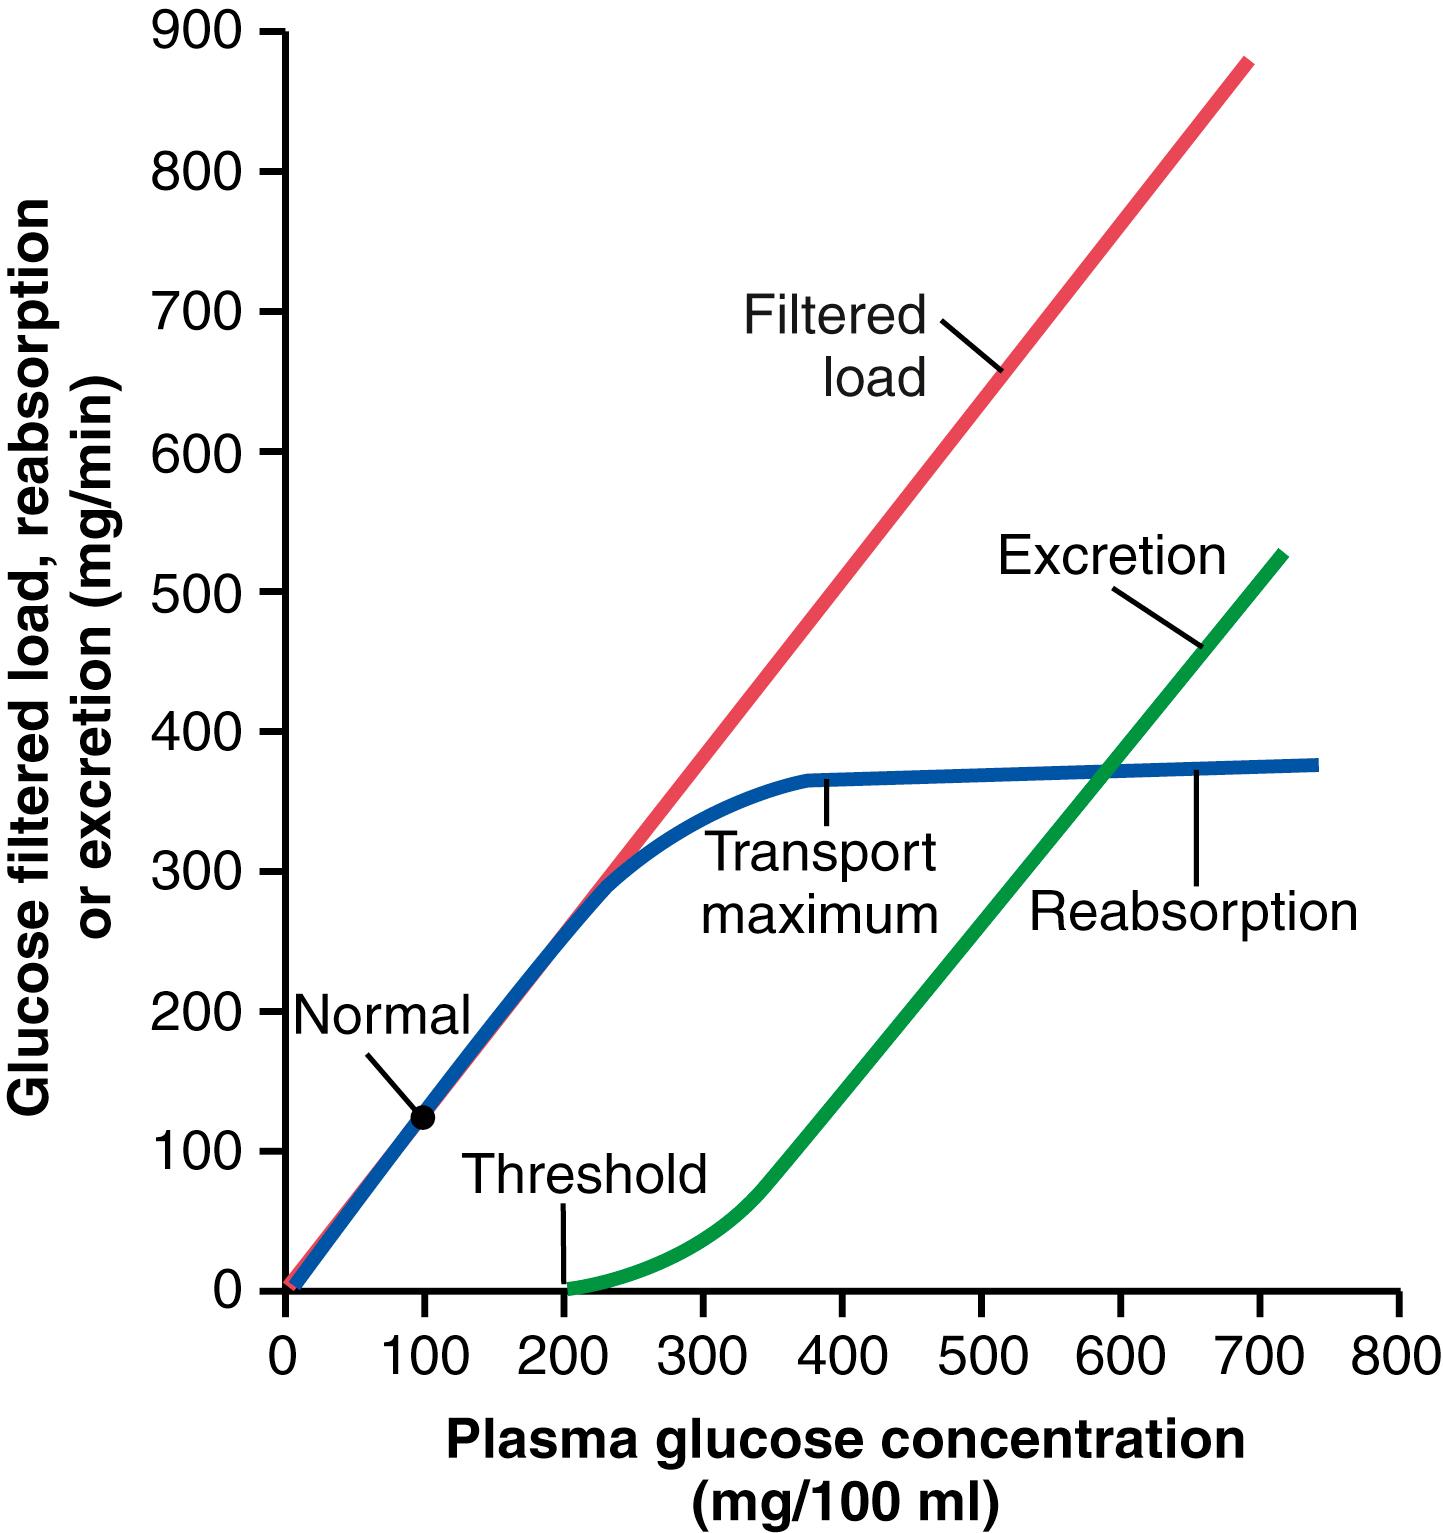 Figure 28-4, Relationships among the filtered load of glucose, rate of glucose reabsorption by the renal tubules, and rate of glucose excretion in the urine. The transport maximum is the maximum rate at which glucose can be reabsorbed from the tubules. The threshold for glucose refers to the filtered load of glucose at which glucose first begins to be excreted in the urine.